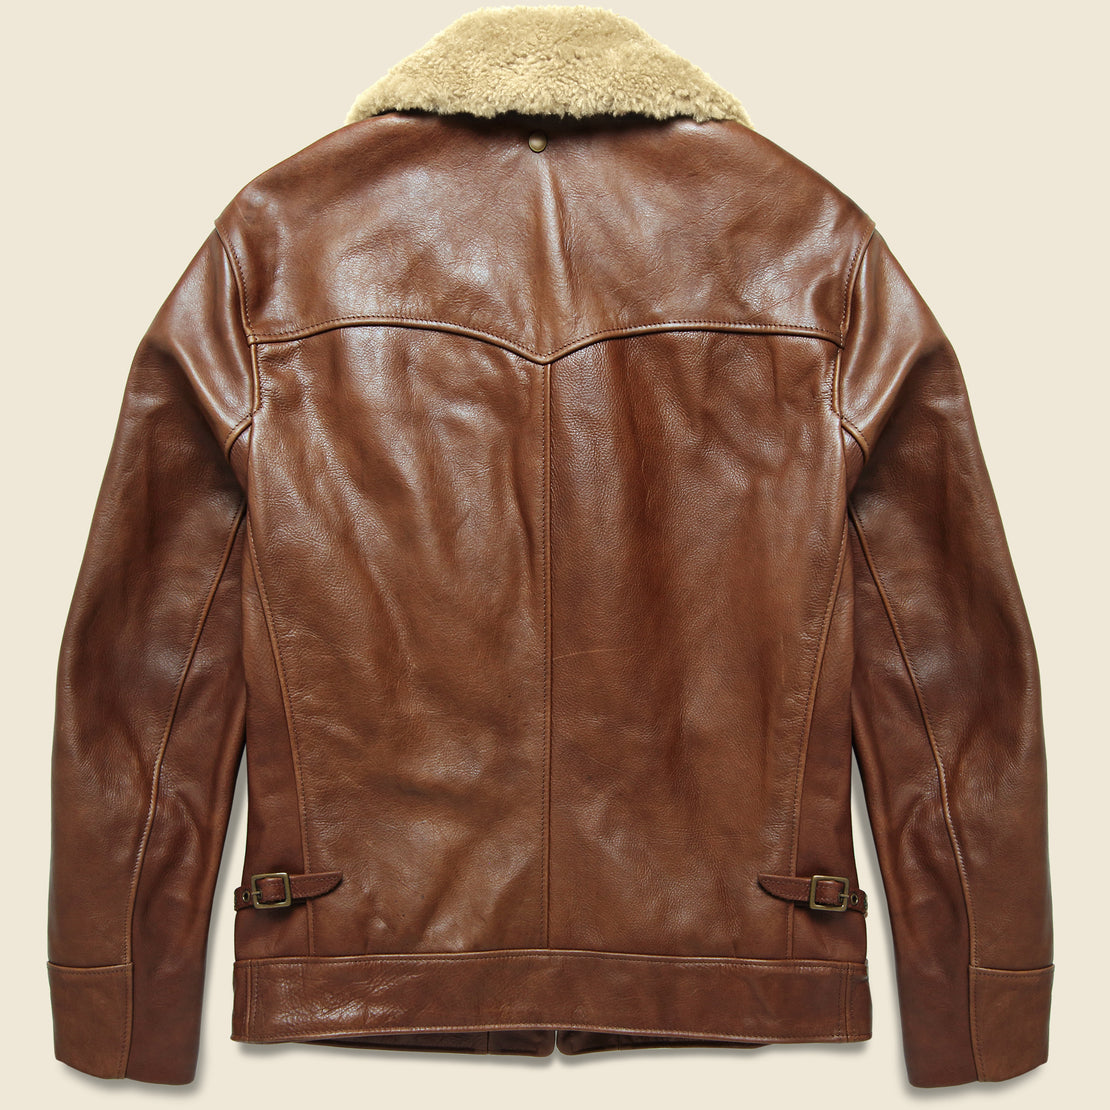 Waxy Antique Cowhide Moto Jacket - Luggage - Schott - STAG Provisions - Outerwear - Coat / Jacket